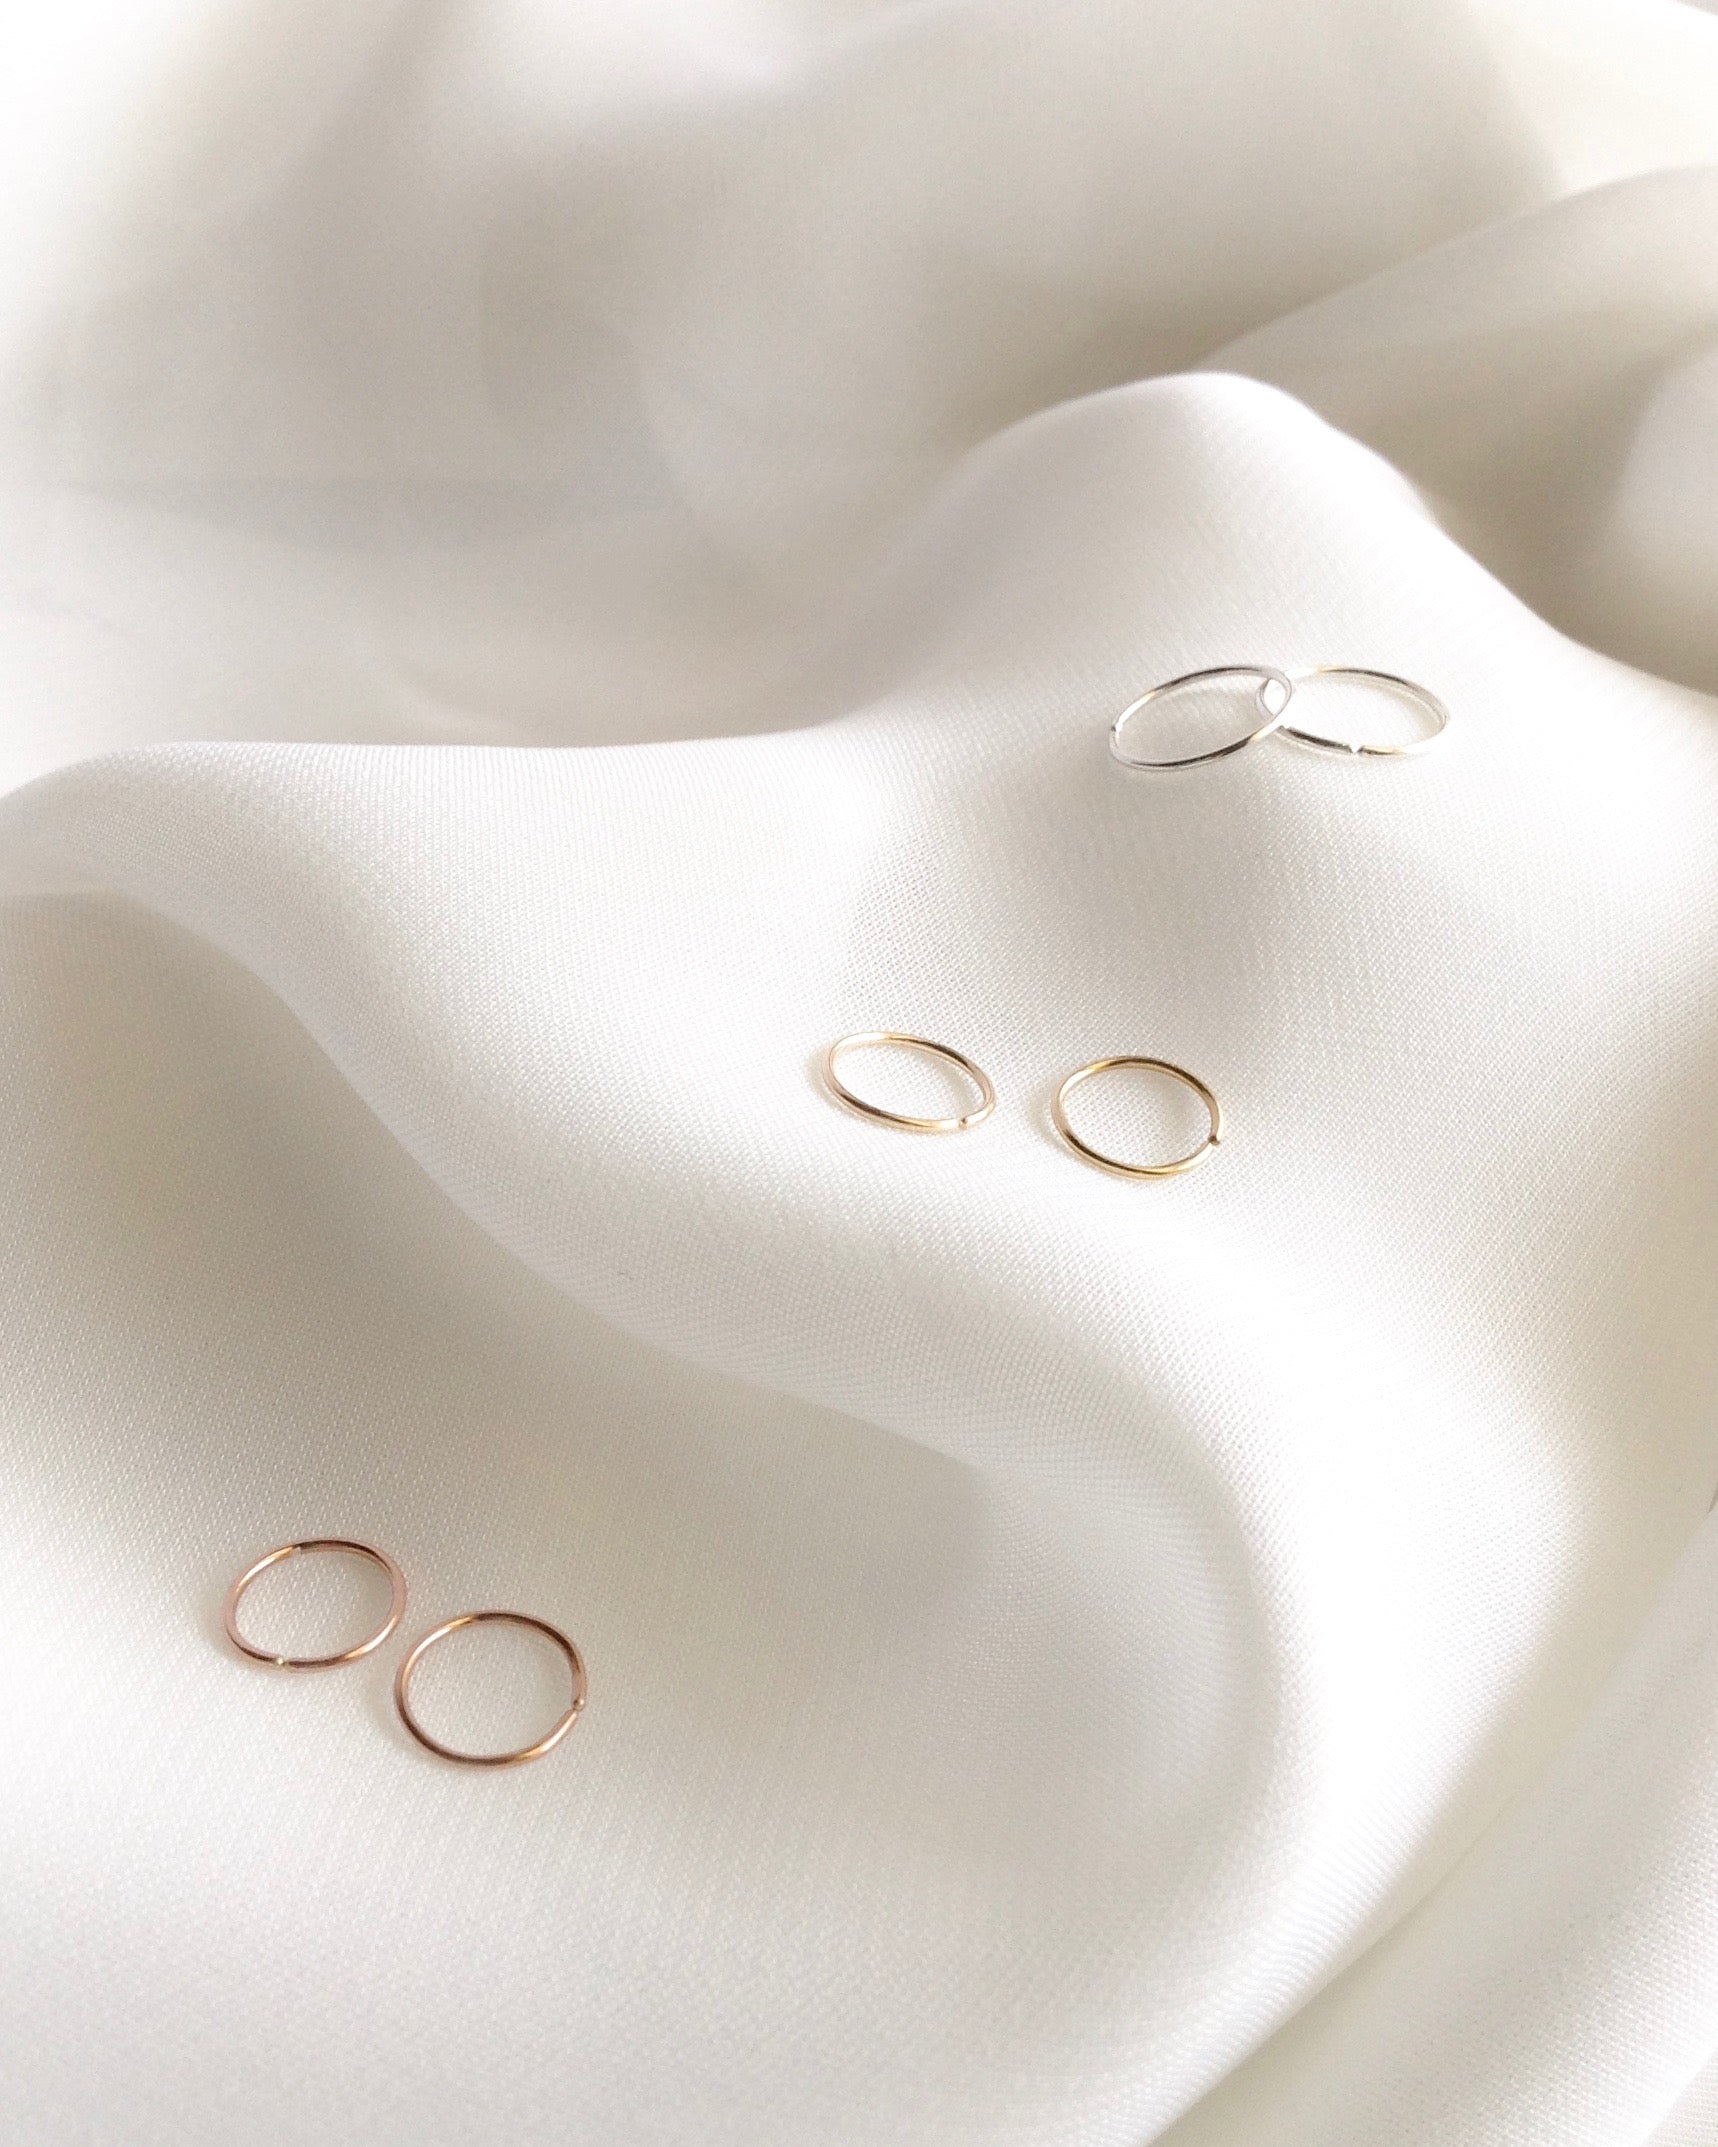 Simple Endless Cartilage and Nose Hoops in Gold Filled Sterling Silver and Rose Gold Filled | IB Jewelry